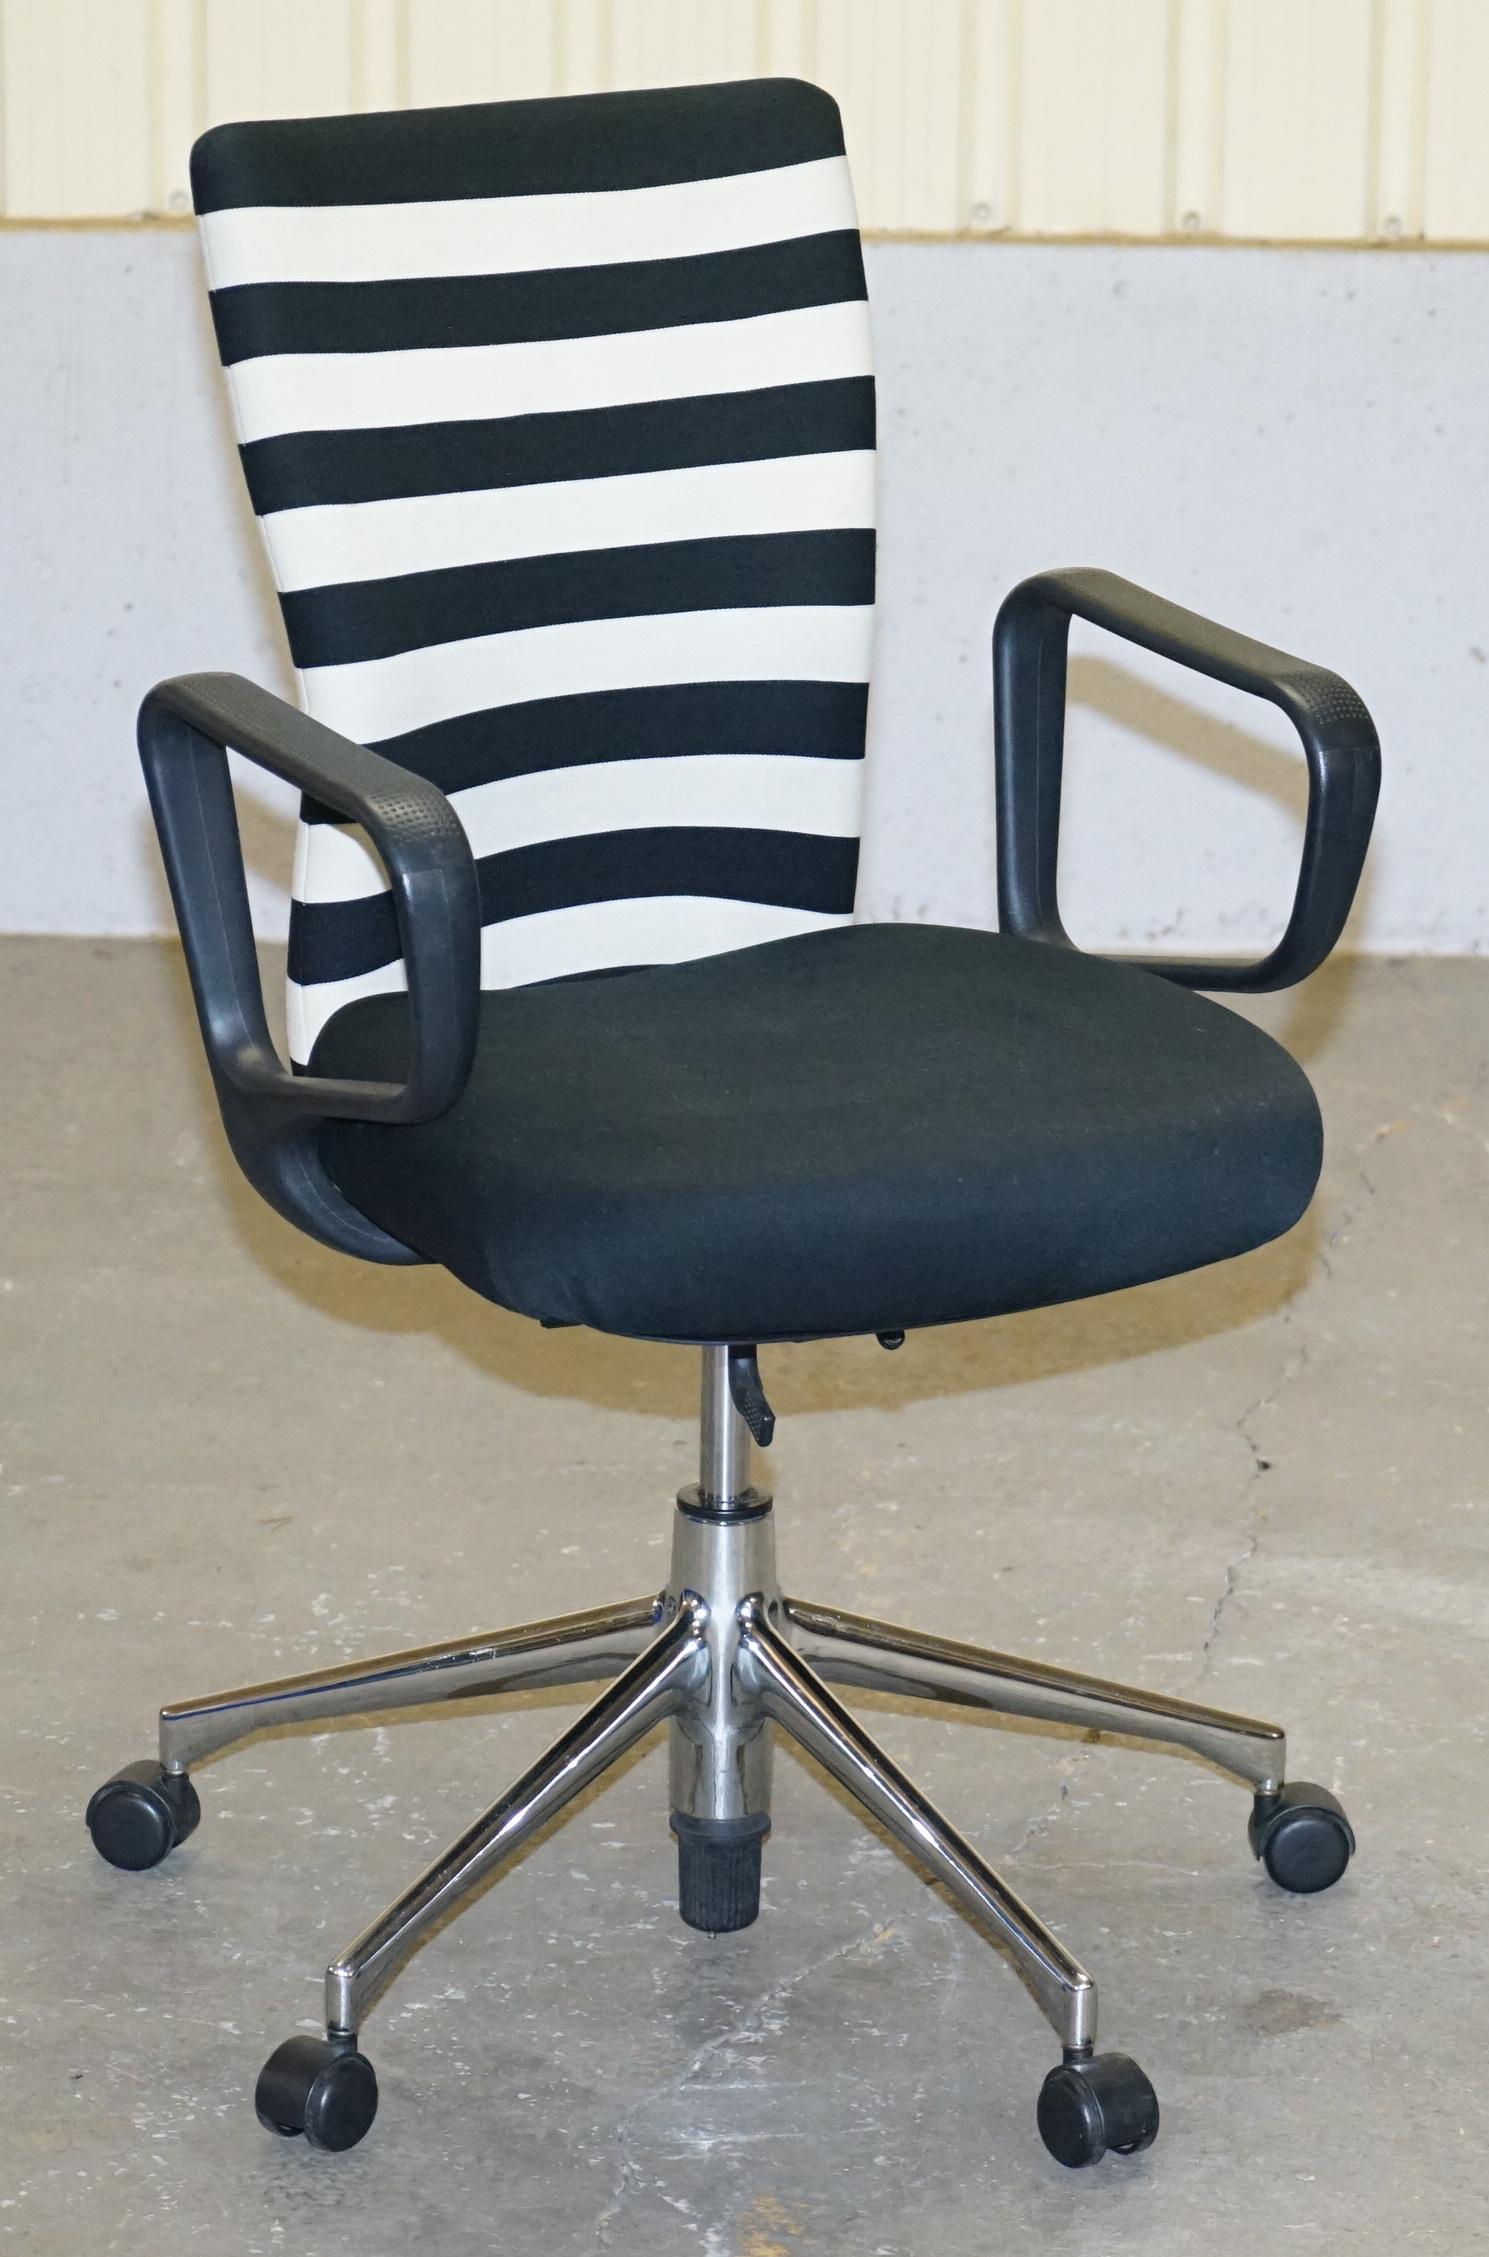 We are delighted to offer for sale 1 of 2 Original Vitra Ergonomic office swivel chairs

This sale is for one armchair with the option to buy the pair

This is exceptionally comfortable, it swivels, you can adjust the tilt angle and tension, there